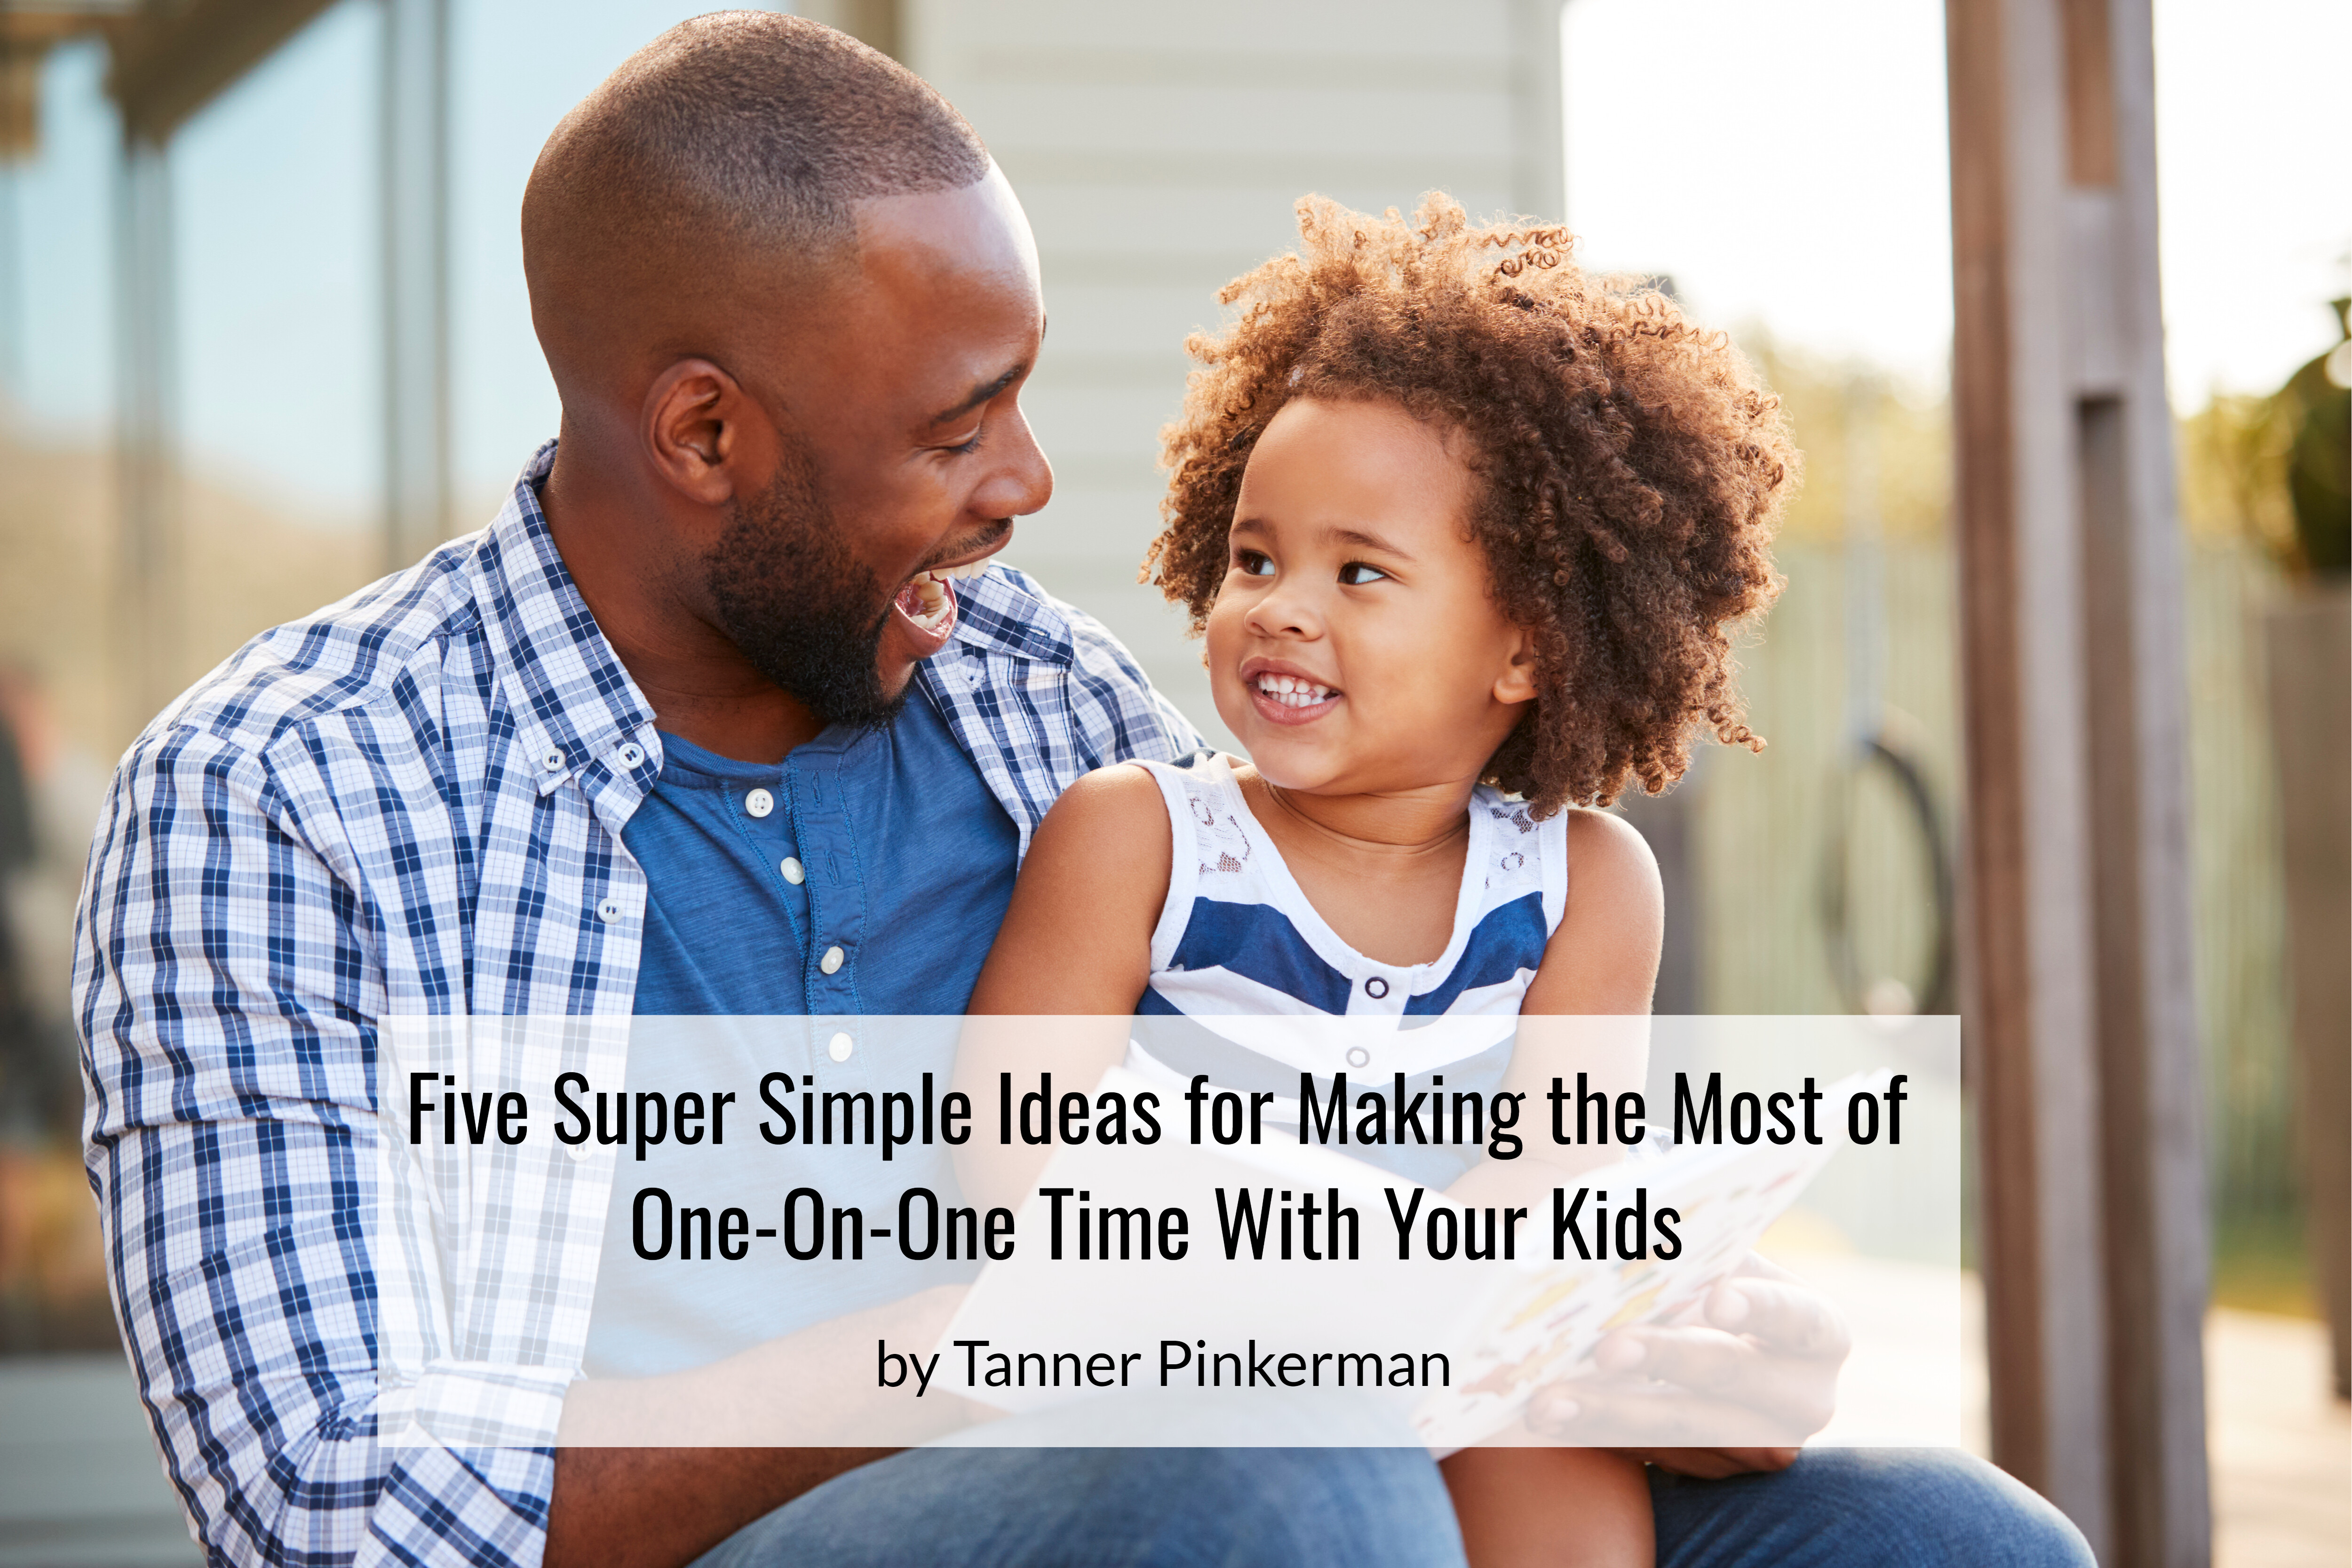 five-super-simple-ideas-for-making-the-most-of-one-on-one-time-with-your-kids